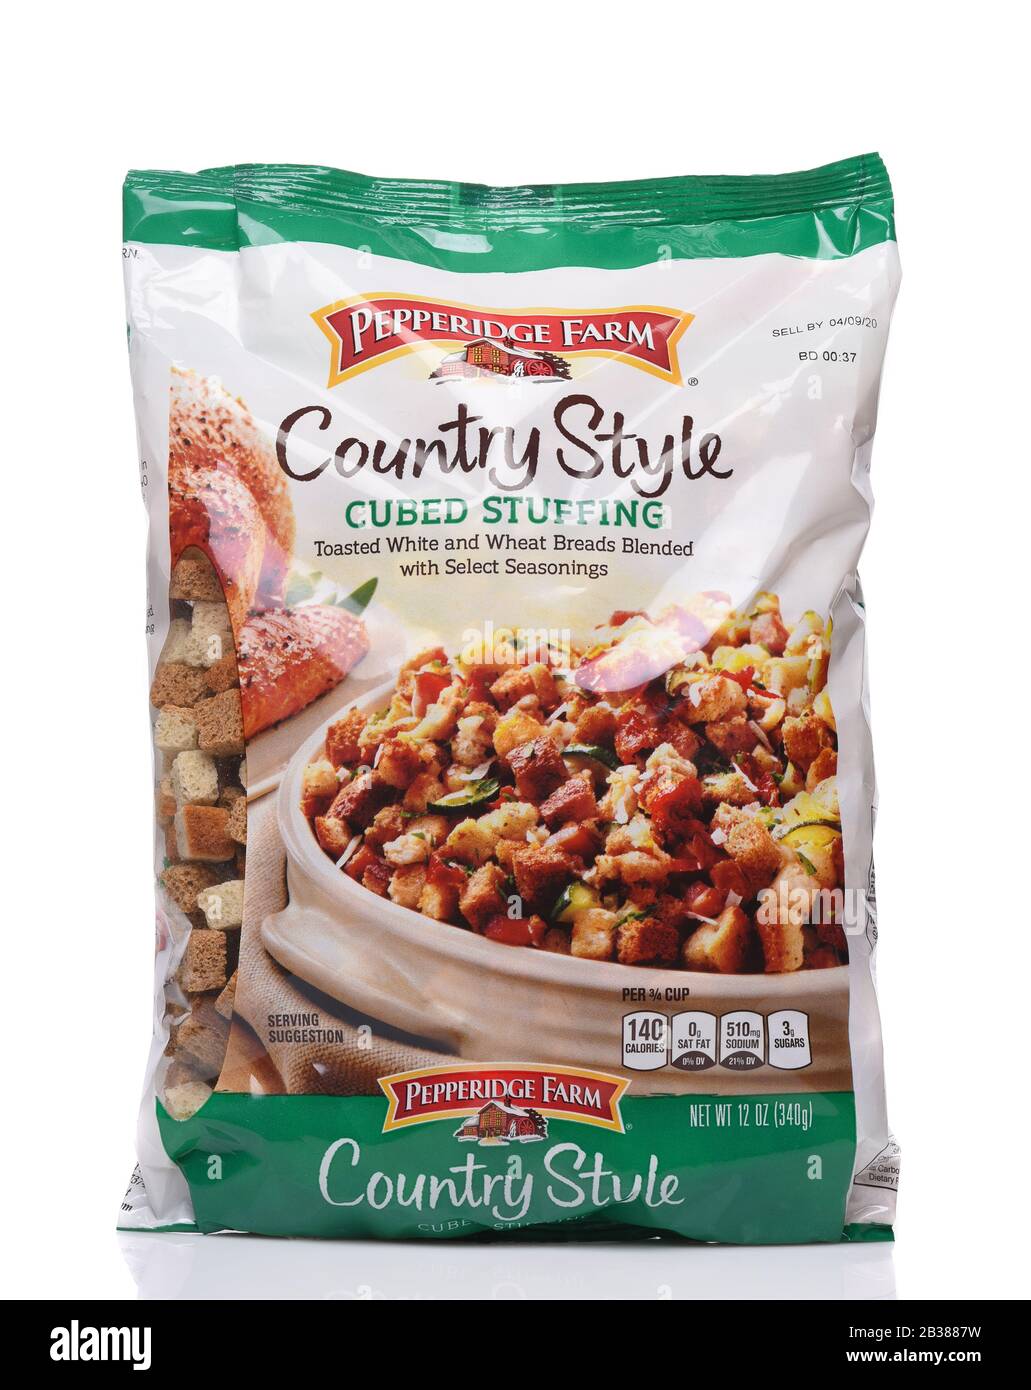 IRVINE, CALIFORNIA - 24 DECEMBER 2019: A package of Pepperidge Farms Country Style Cubed Stuffing. Stock Photo